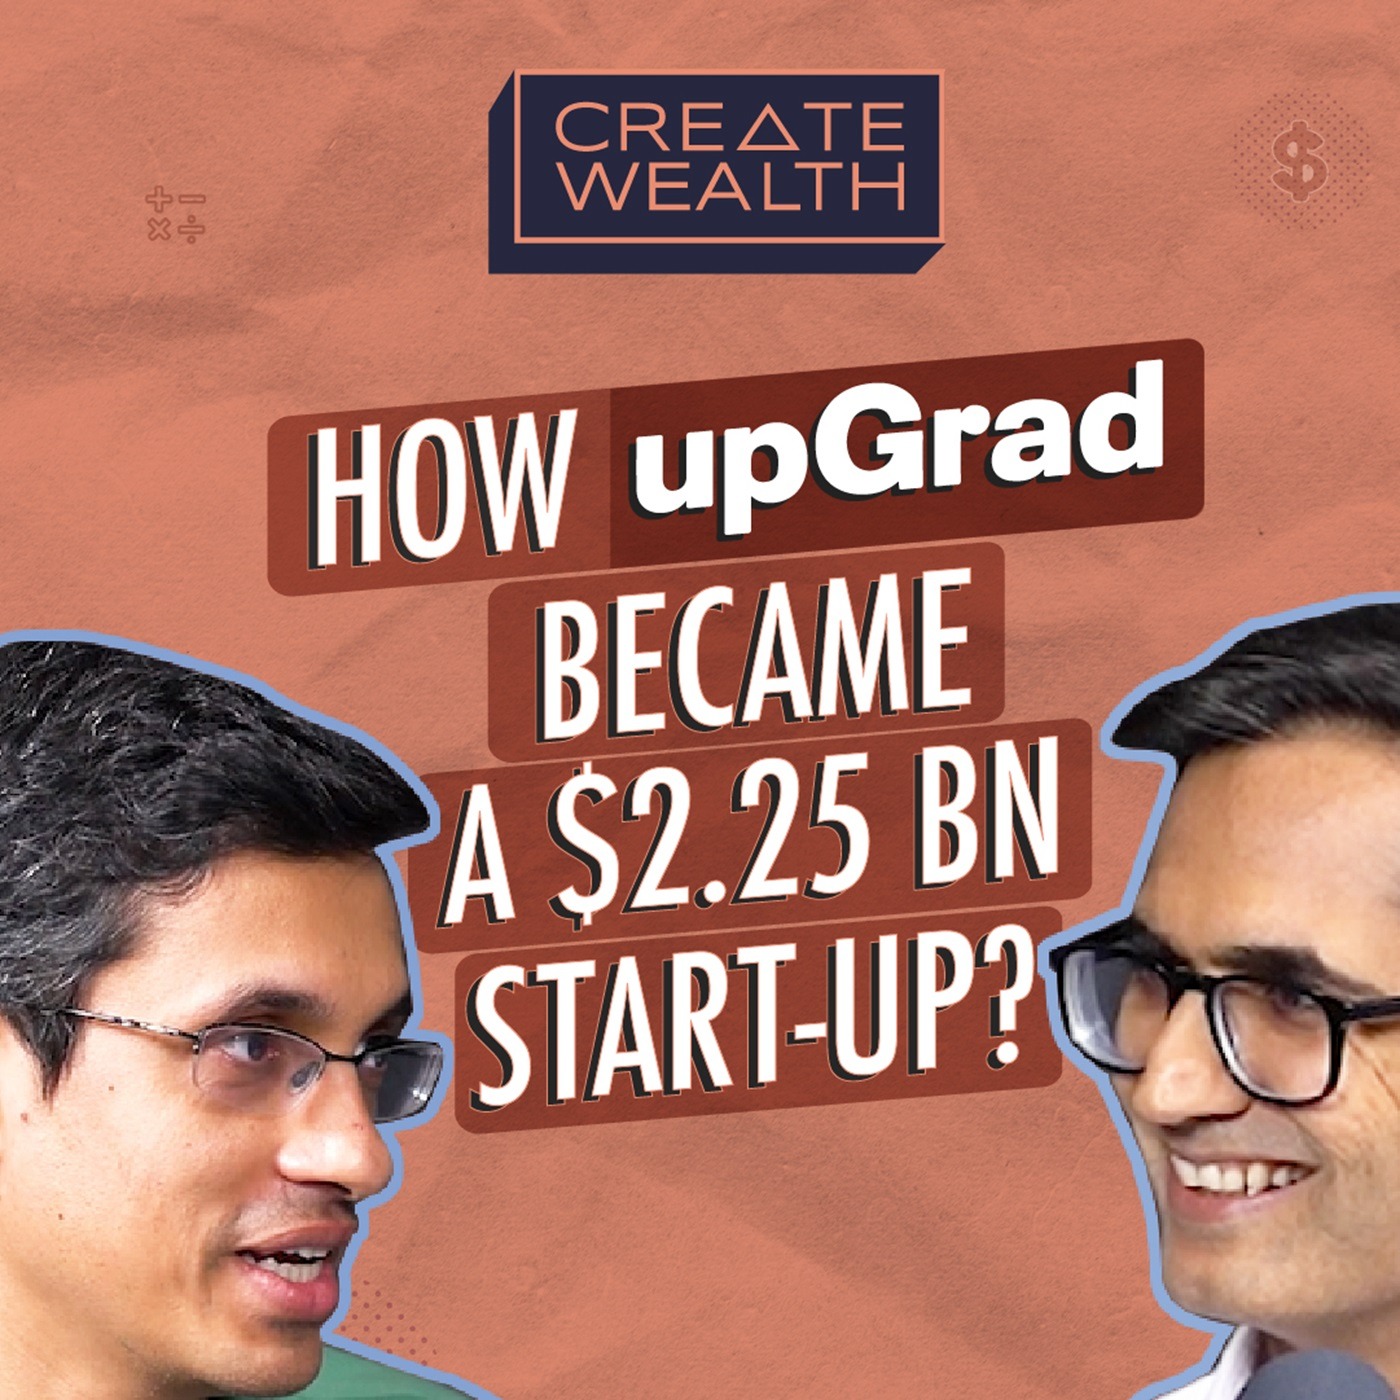 How upGrad became one of the most valued Edtech Business in India Ft. Mayank Kumar, Co-founder, upGrad